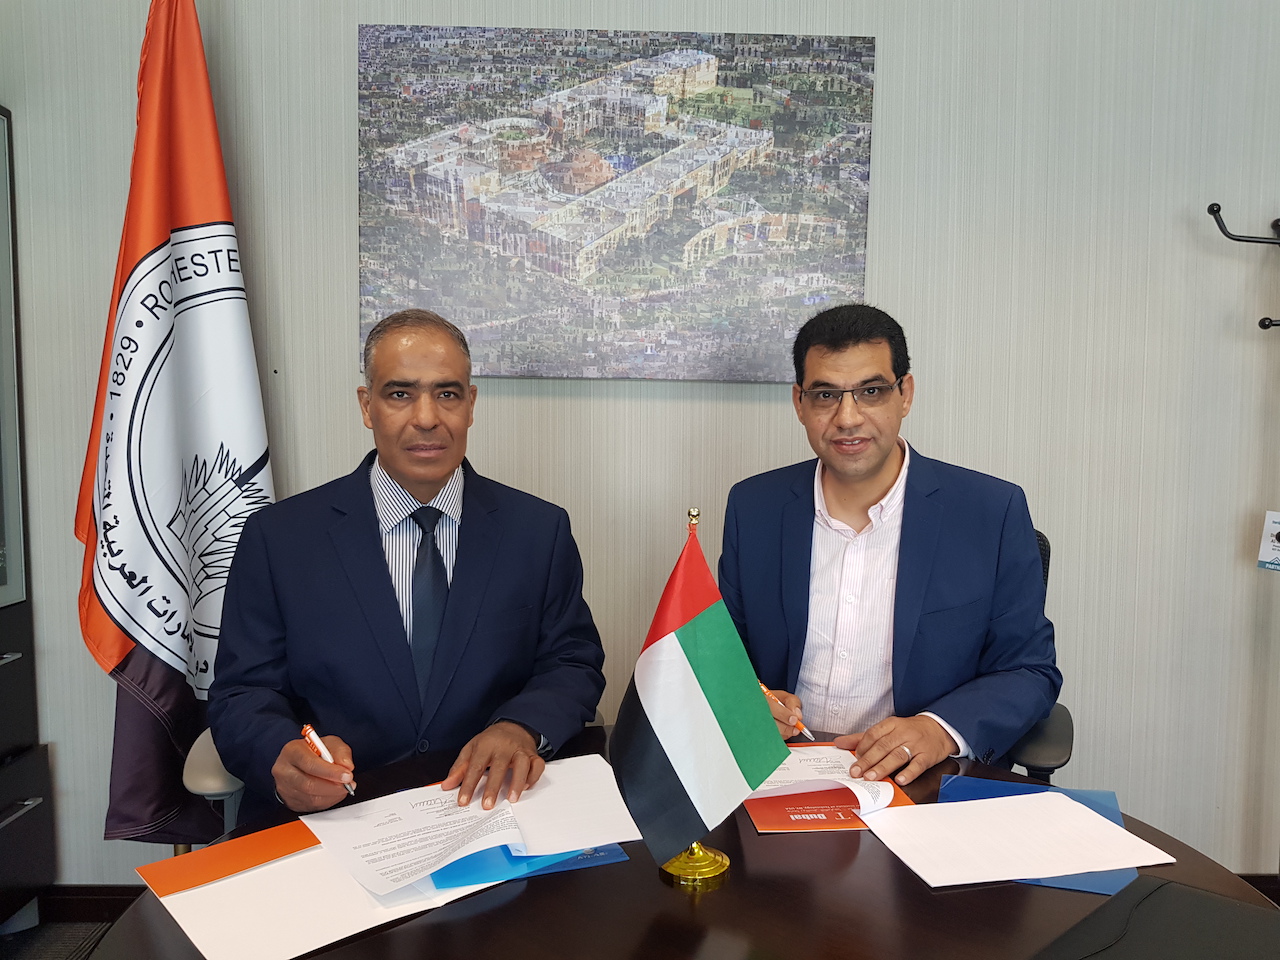 Image for Alcatel-Lucent Enterprise Signs Strategic Partnership With Rochester Institute of Technology Dubai